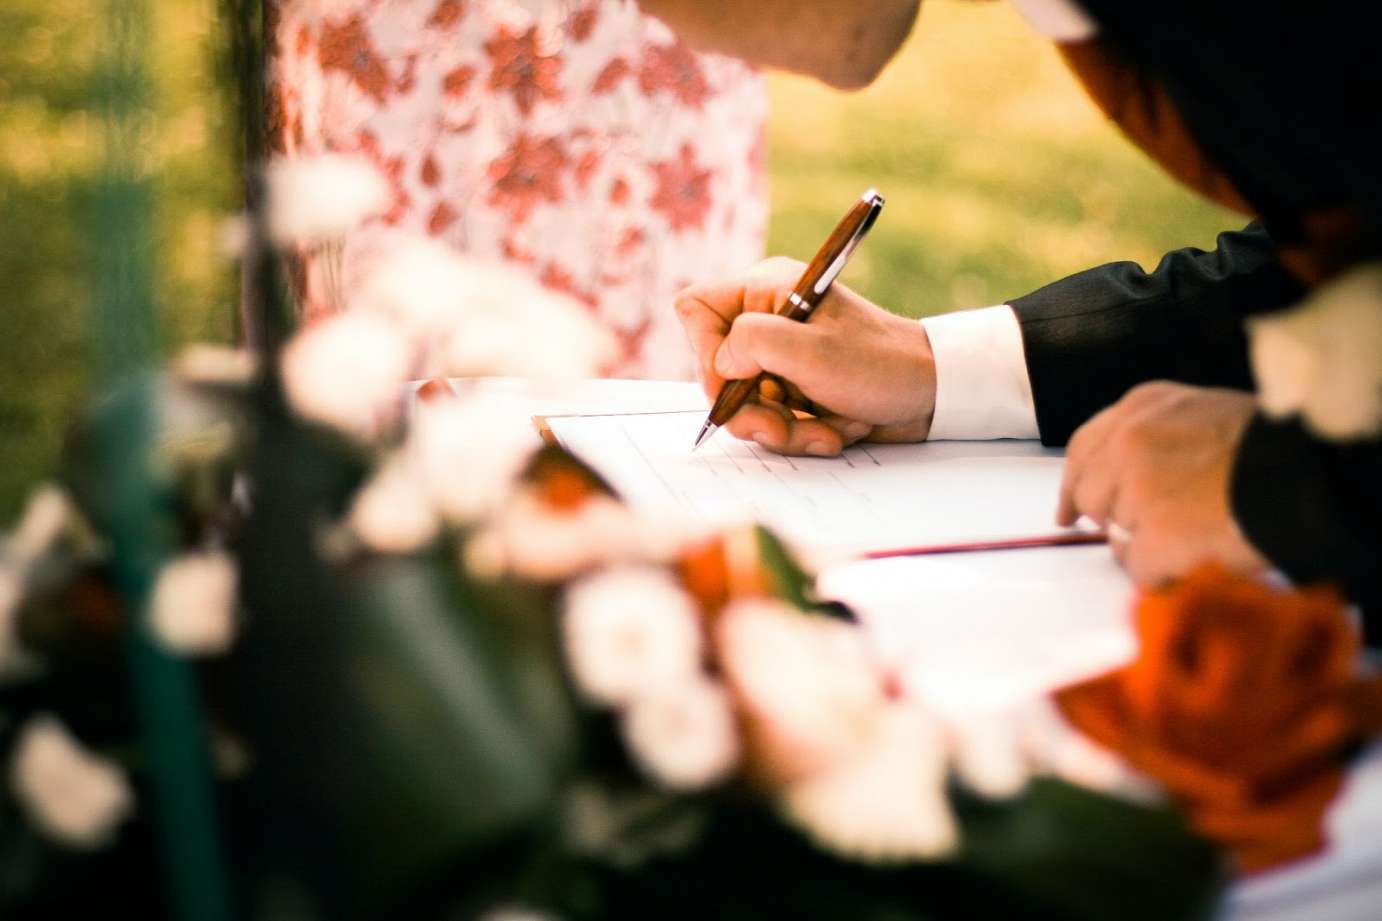 an image of a person using a pen to write in a journal. In the foreground is a blurry floral arrangement.